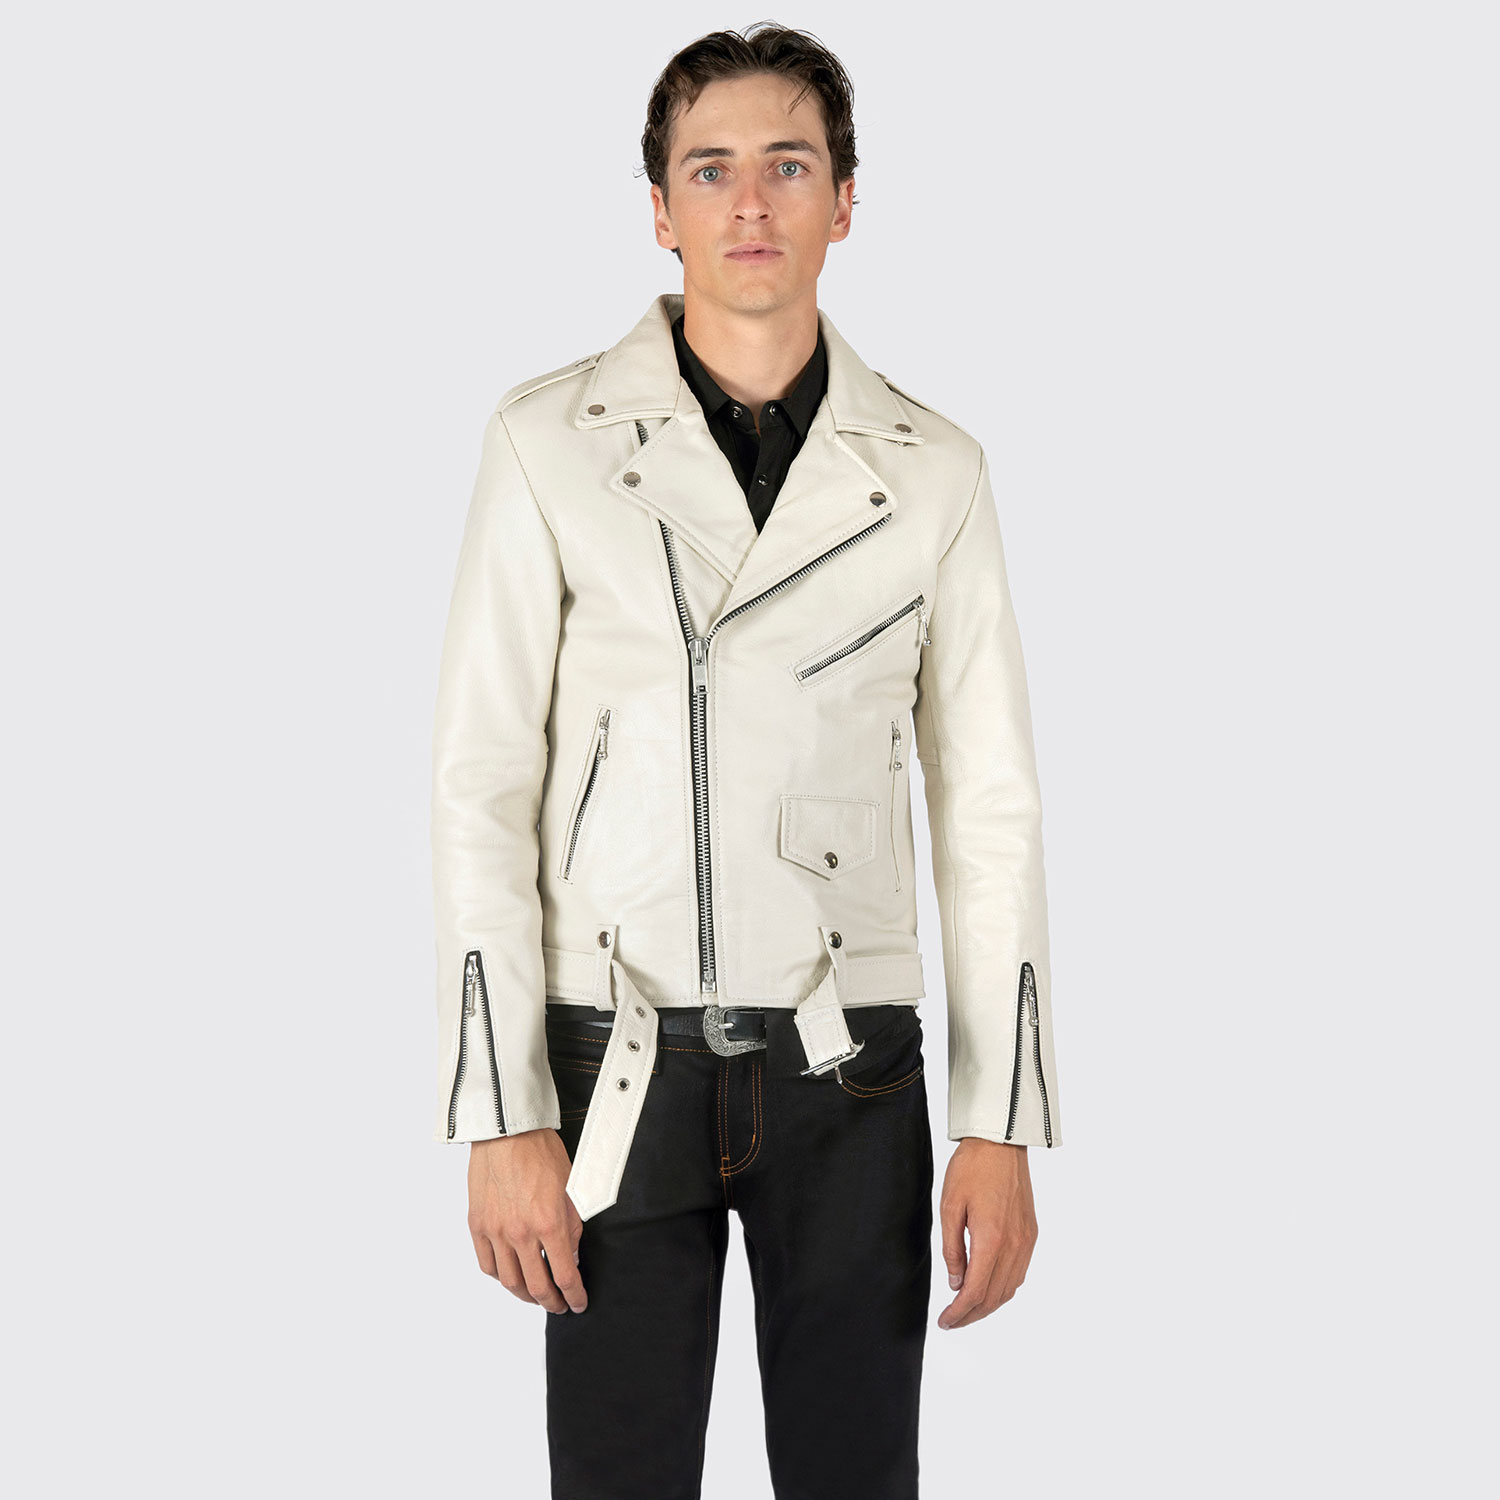 Commando - White Leather Jacket - Men's by Straight to Hell